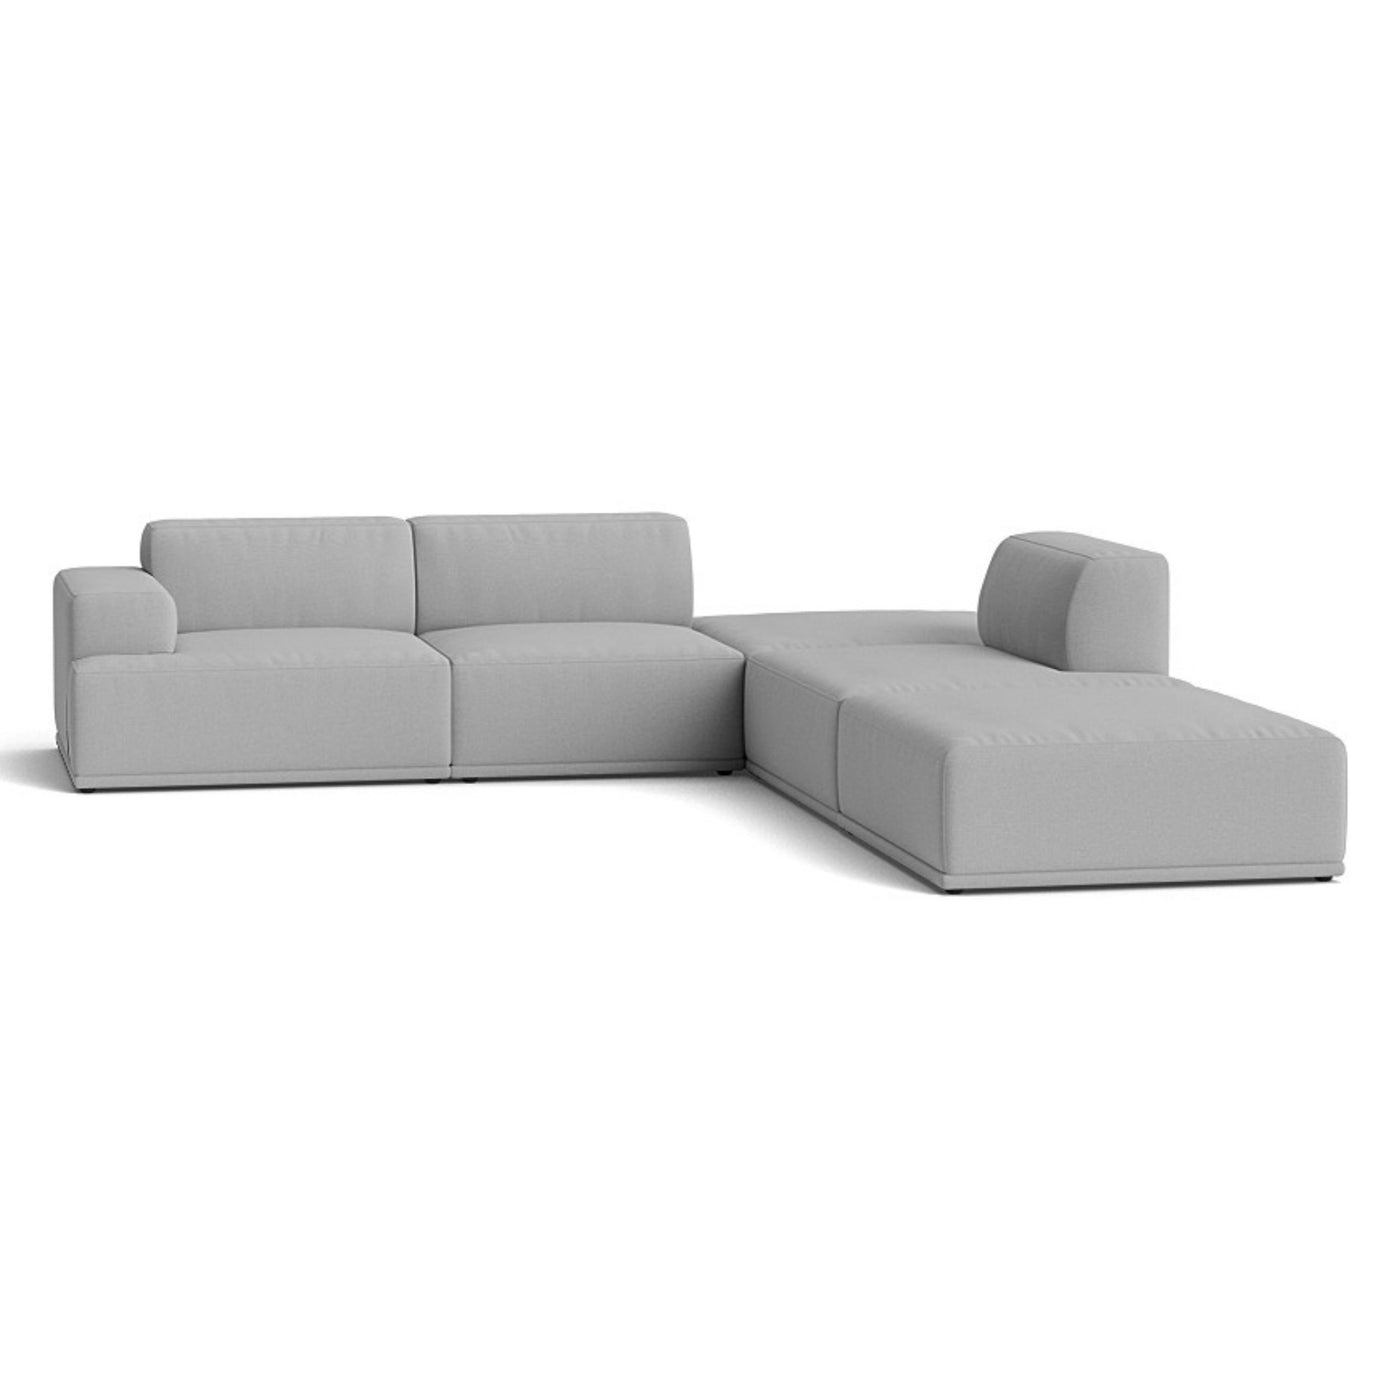 Muuto Connect Soft Modular Corner Sofa, configuration 3. made-to-order from someday designs. #colour_steelcut-trio-133